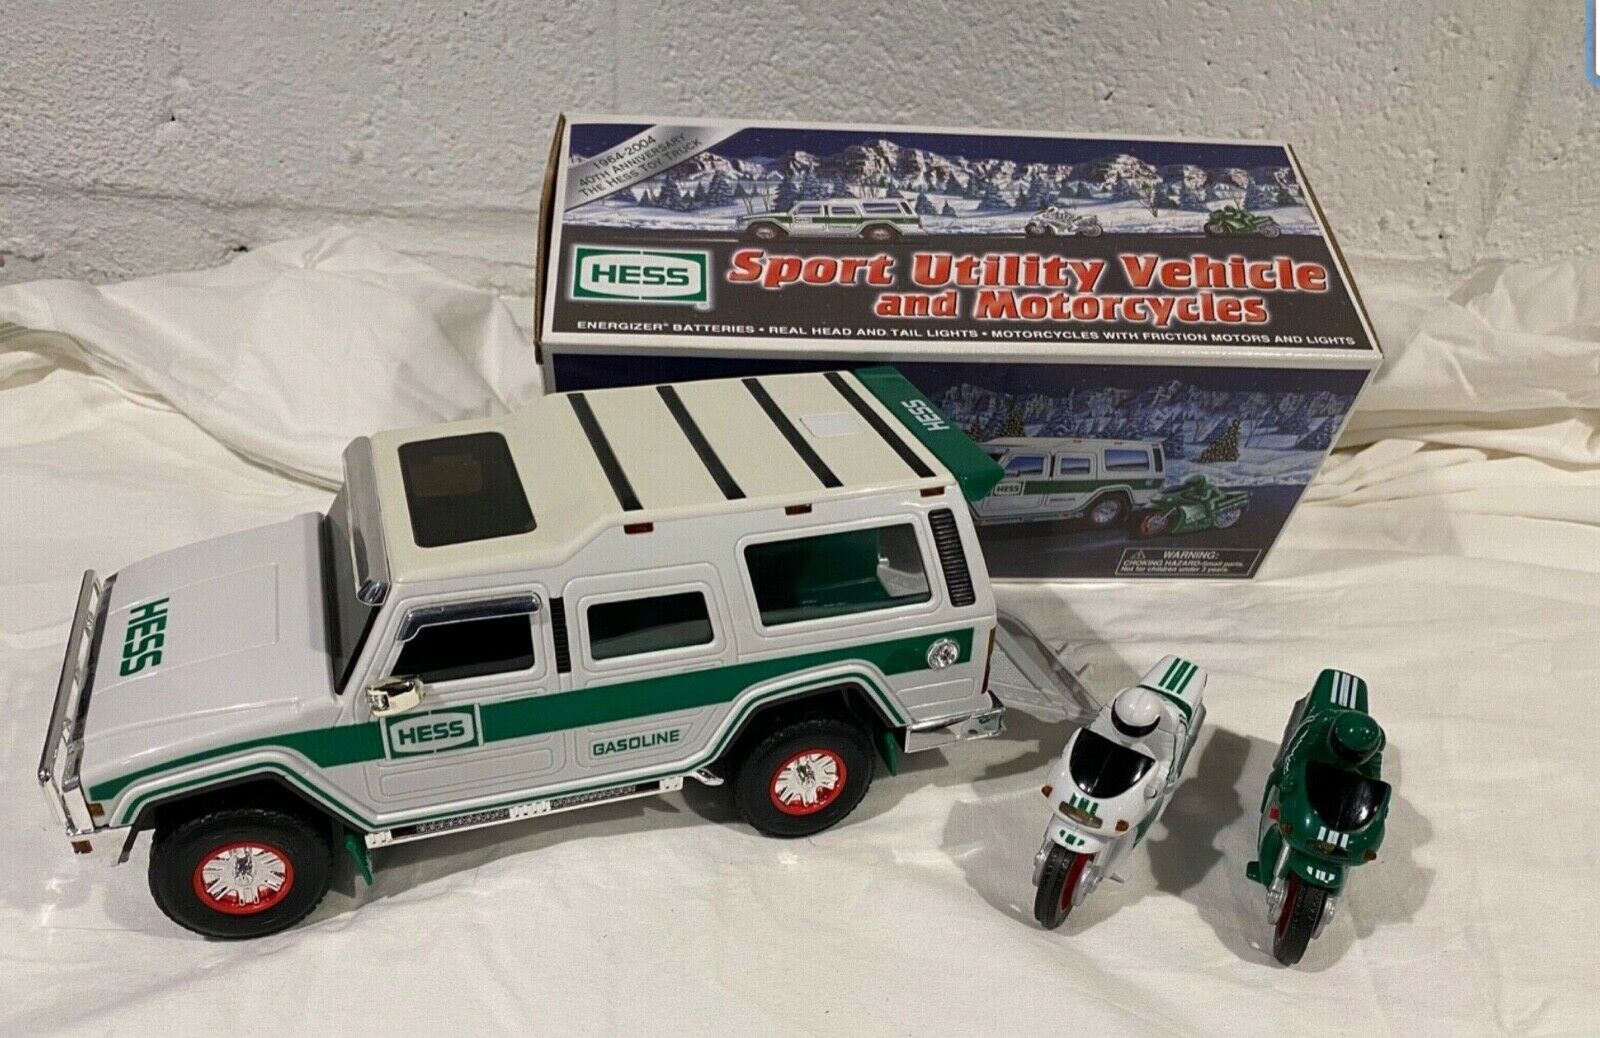 2004 Hess Truck Sport Utility Vehicle And Motorcycles Mint In Box